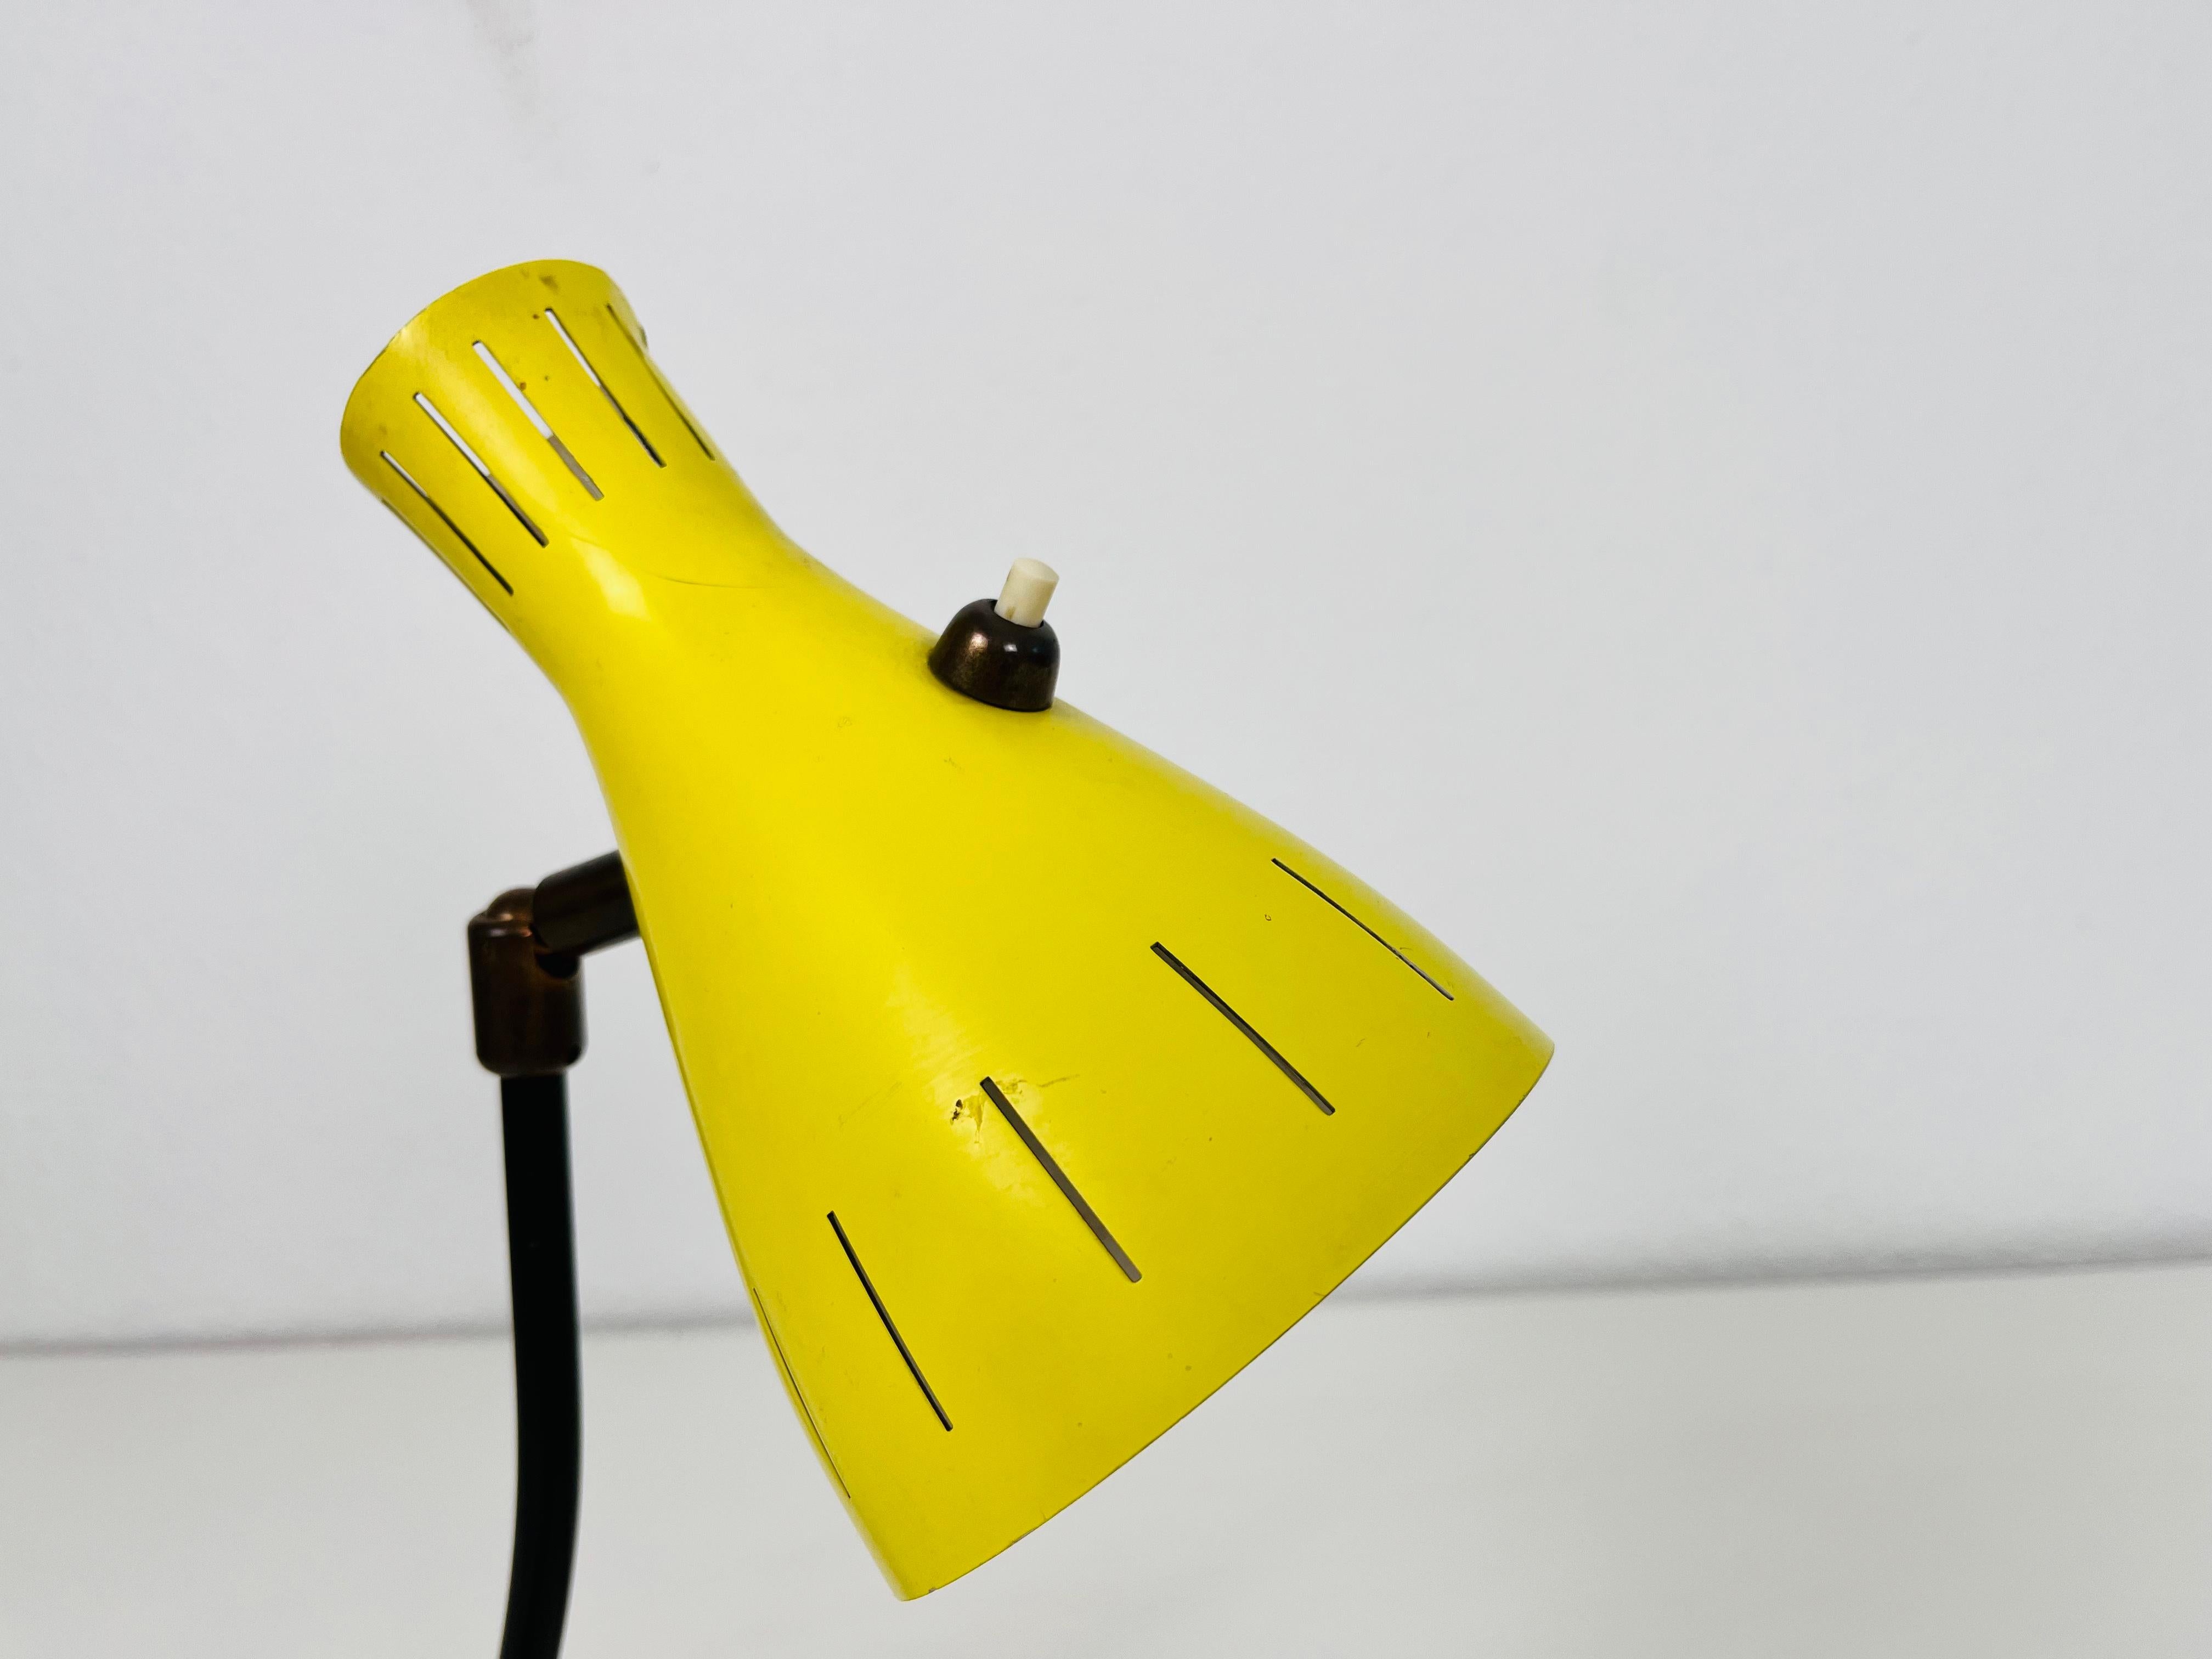 Italian Table Lamp in the Style of Stilnovo, 1960s, Italy For Sale 2